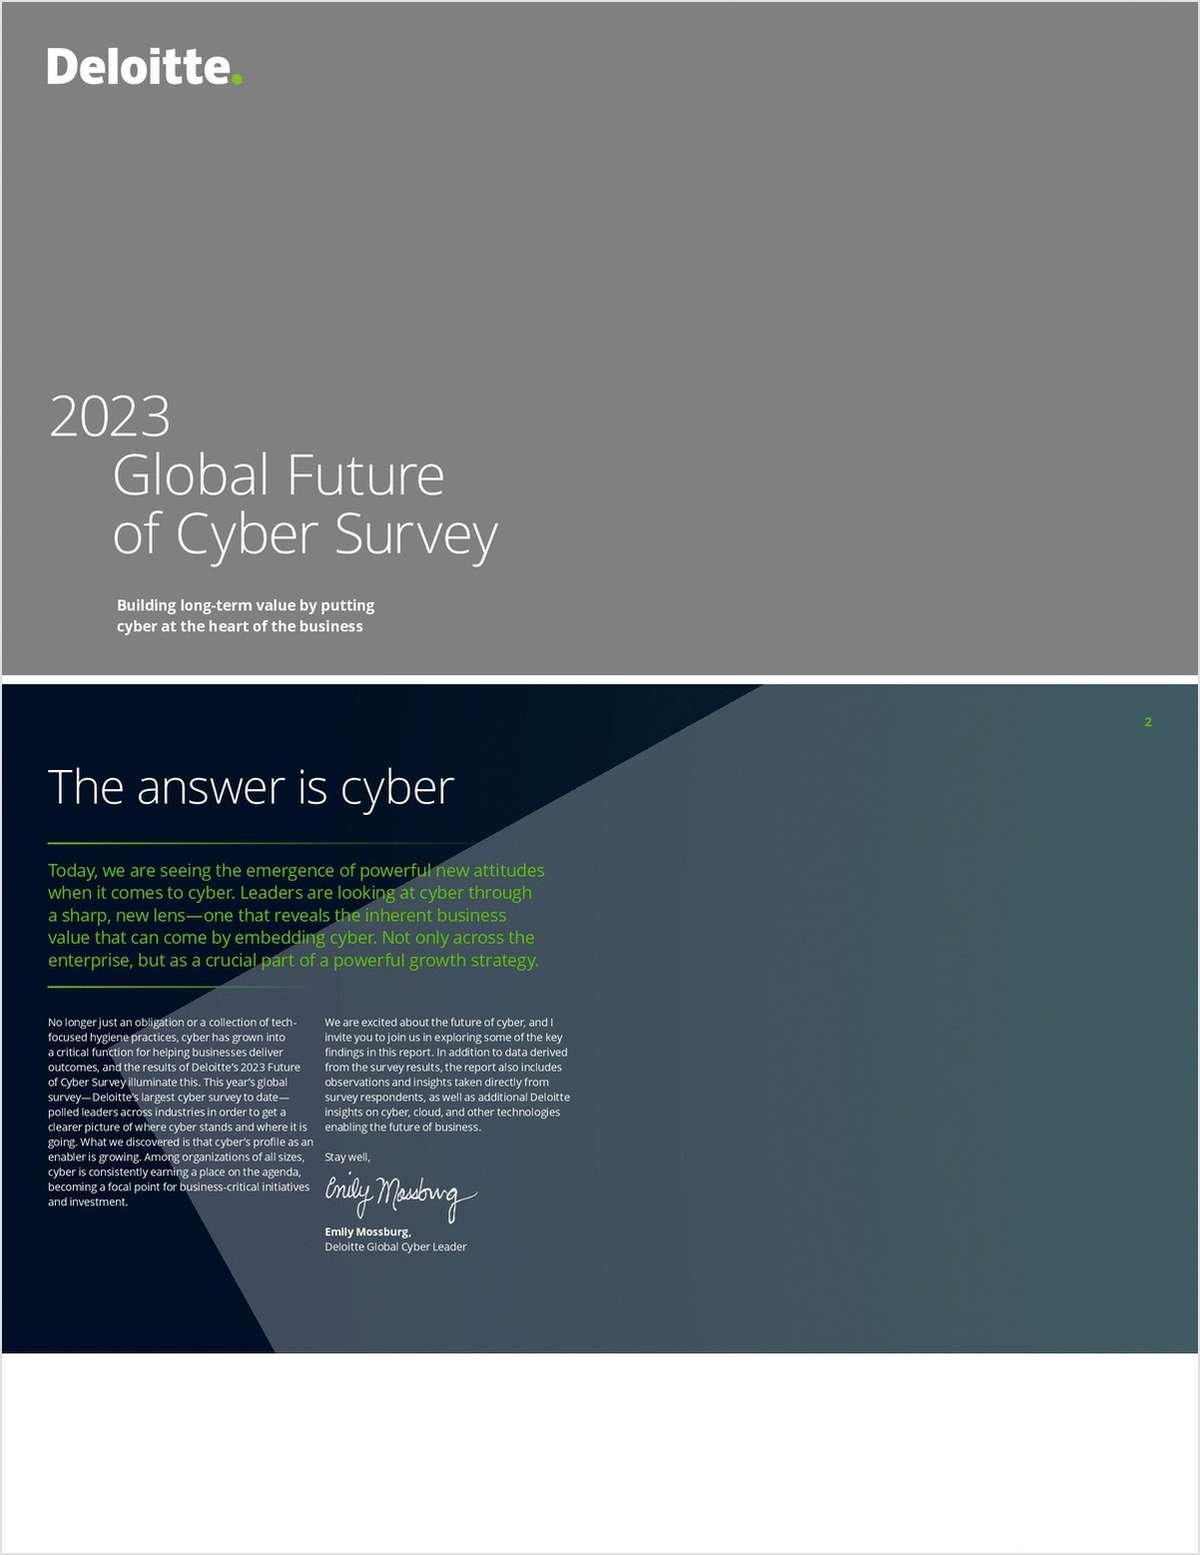 2023 Global Future of Cyber Survey: Building long term value by putting cyber at the heart of the business